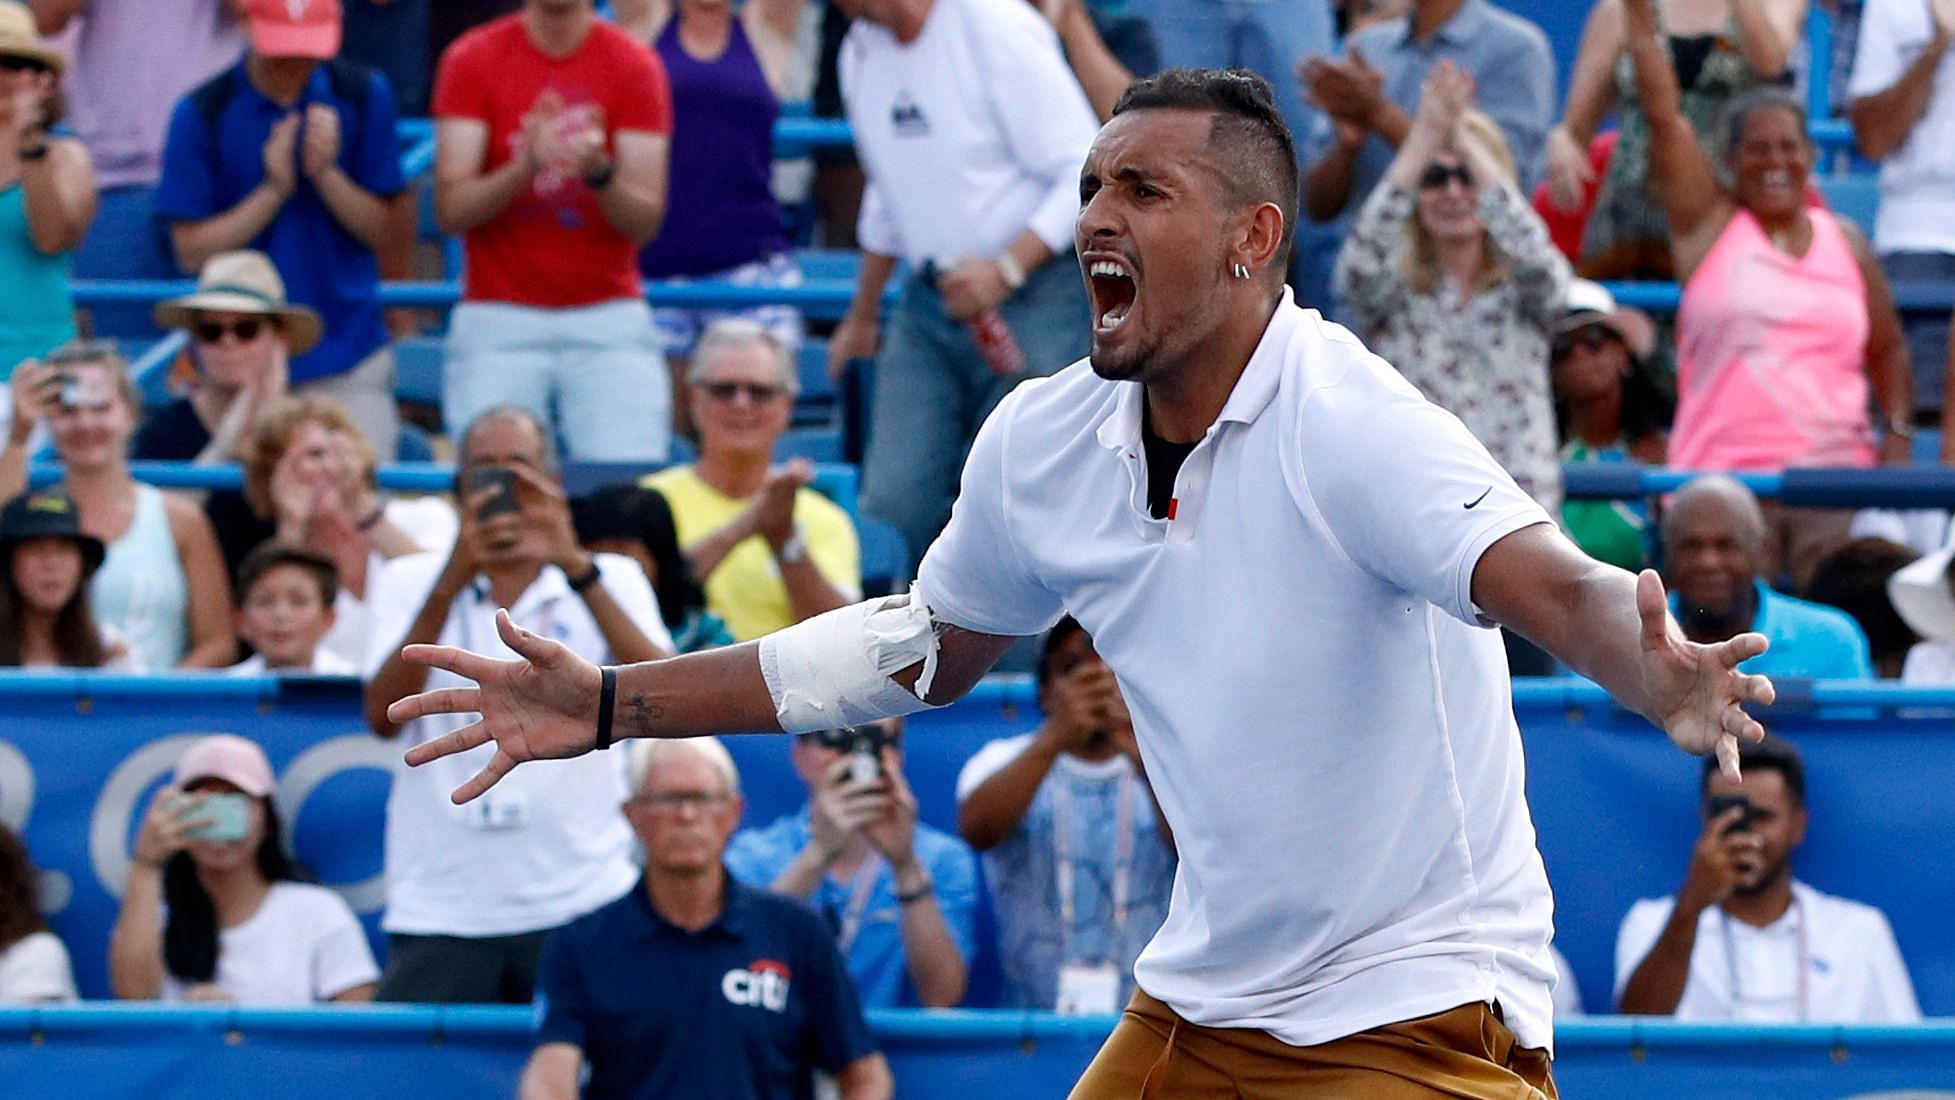 Nick Kyrgios was fined $113,000 by the ATP for expletive-filled outbursts in which he smashed rackets.